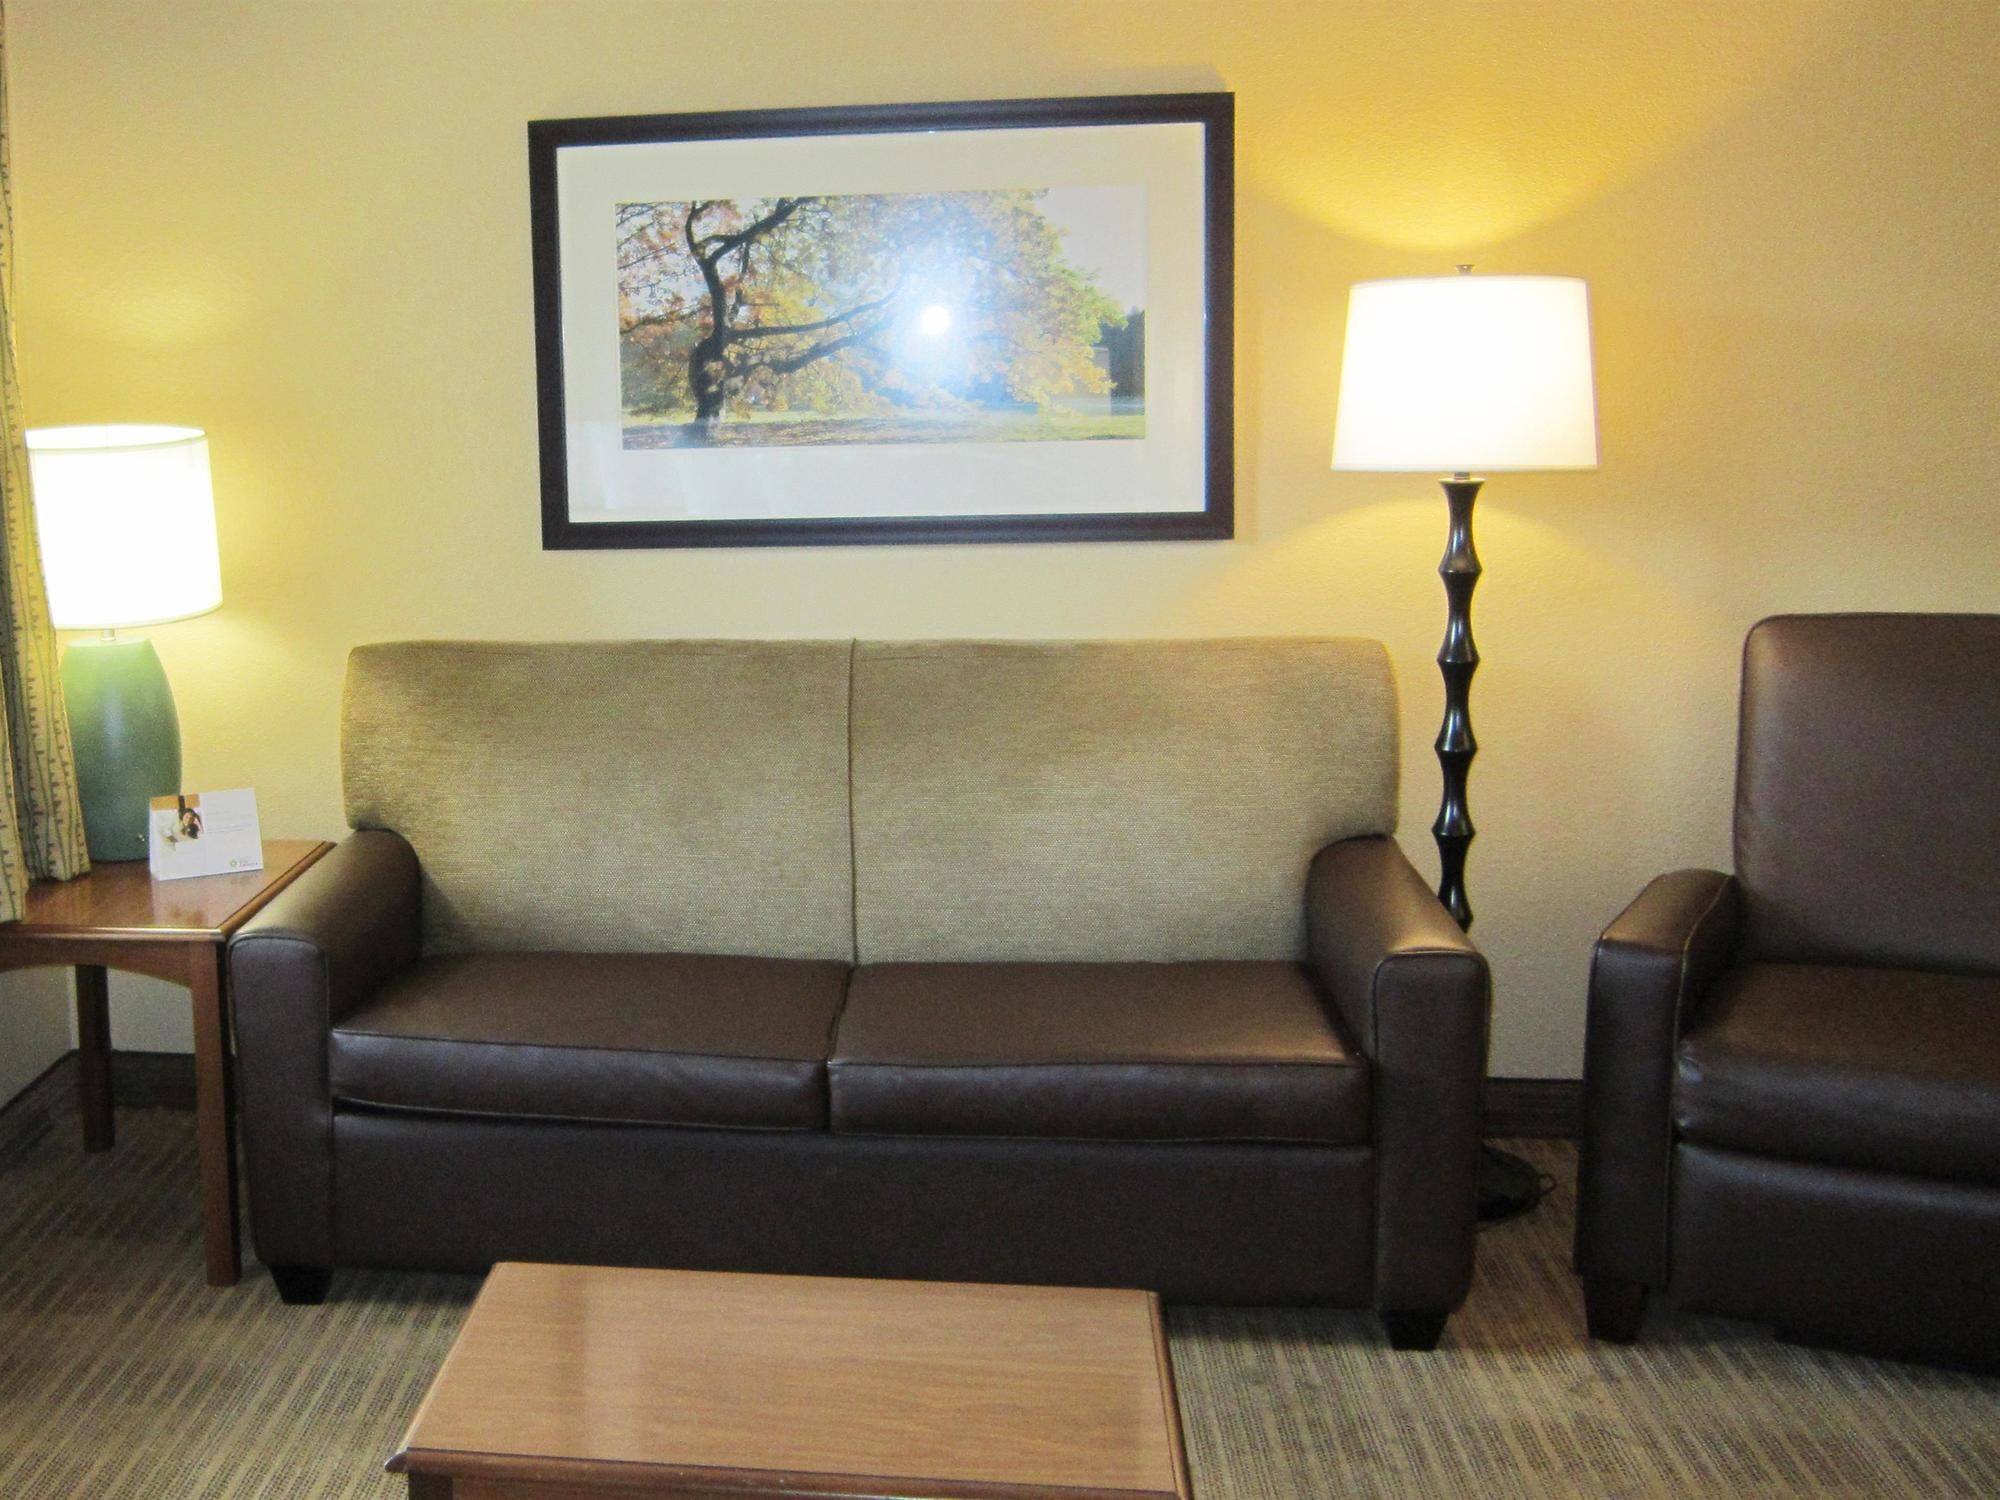 Extended Stay America San Jose Edenvale South